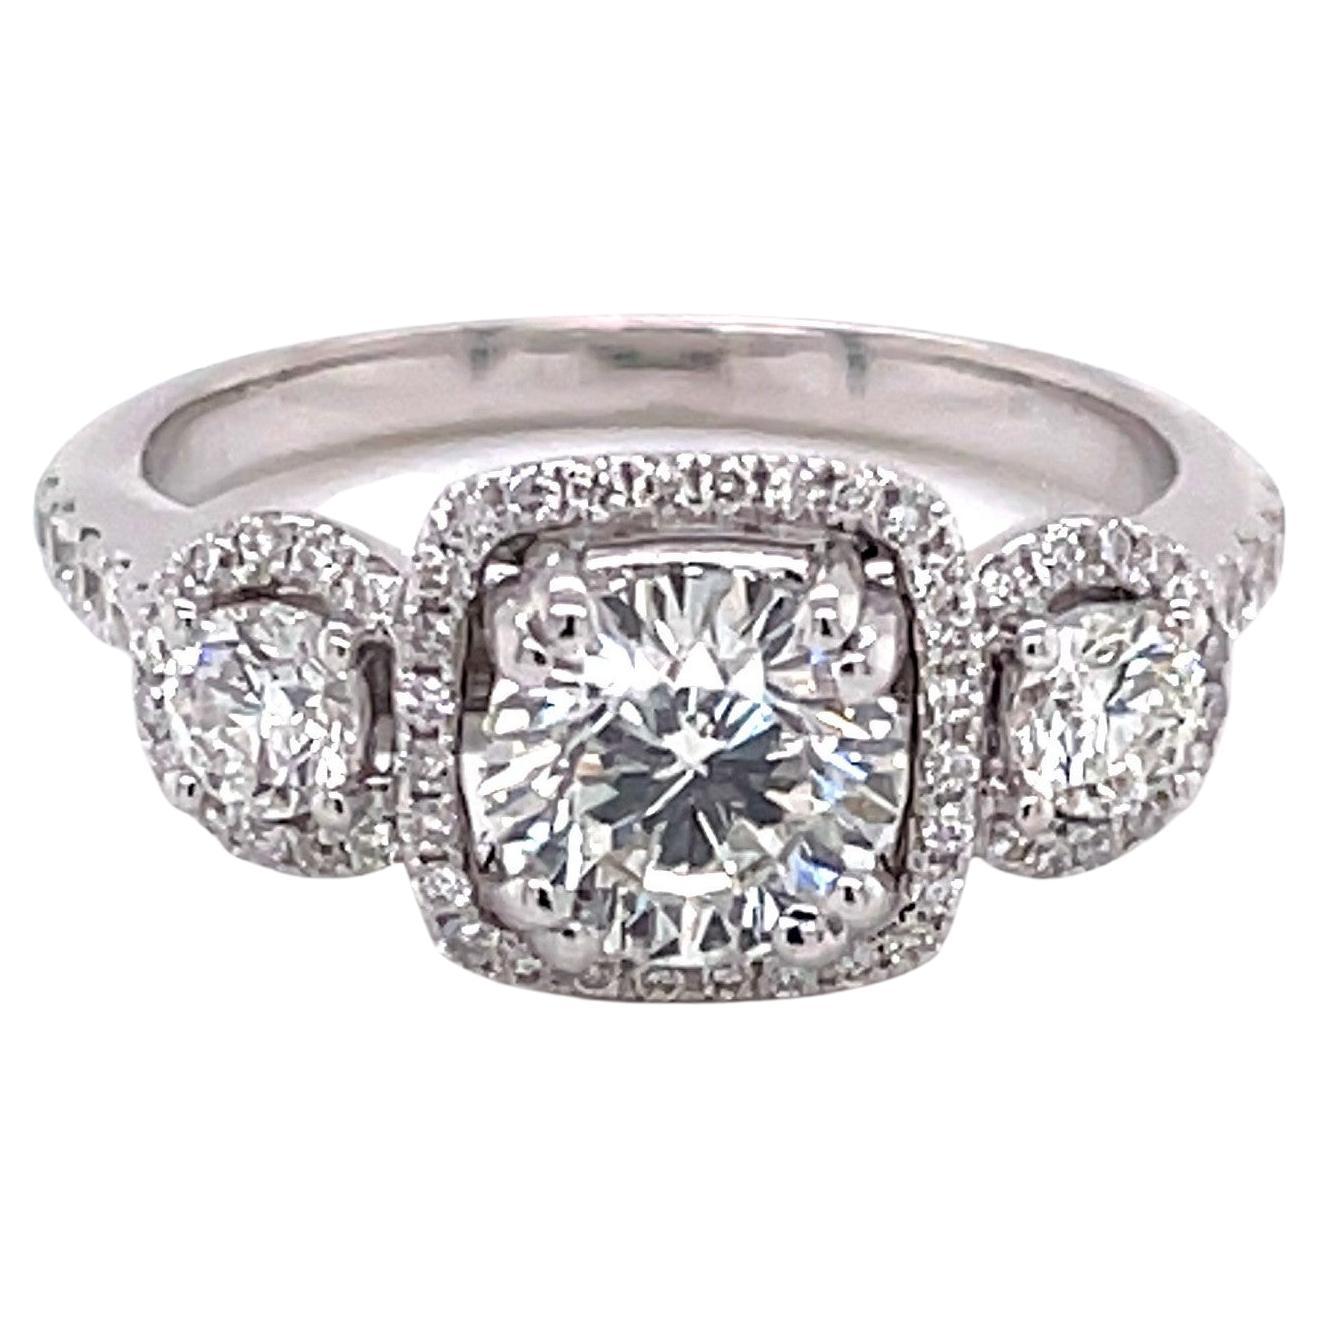 With a total diamond carat weight of over 1.5 carats, this elegant ring has enormous sparkle and light. Prominent on the raised gallery of this ring, each of the three full cut round diamonds; left .42 carat H/VS / center .61 carat  H/I2 / right .52